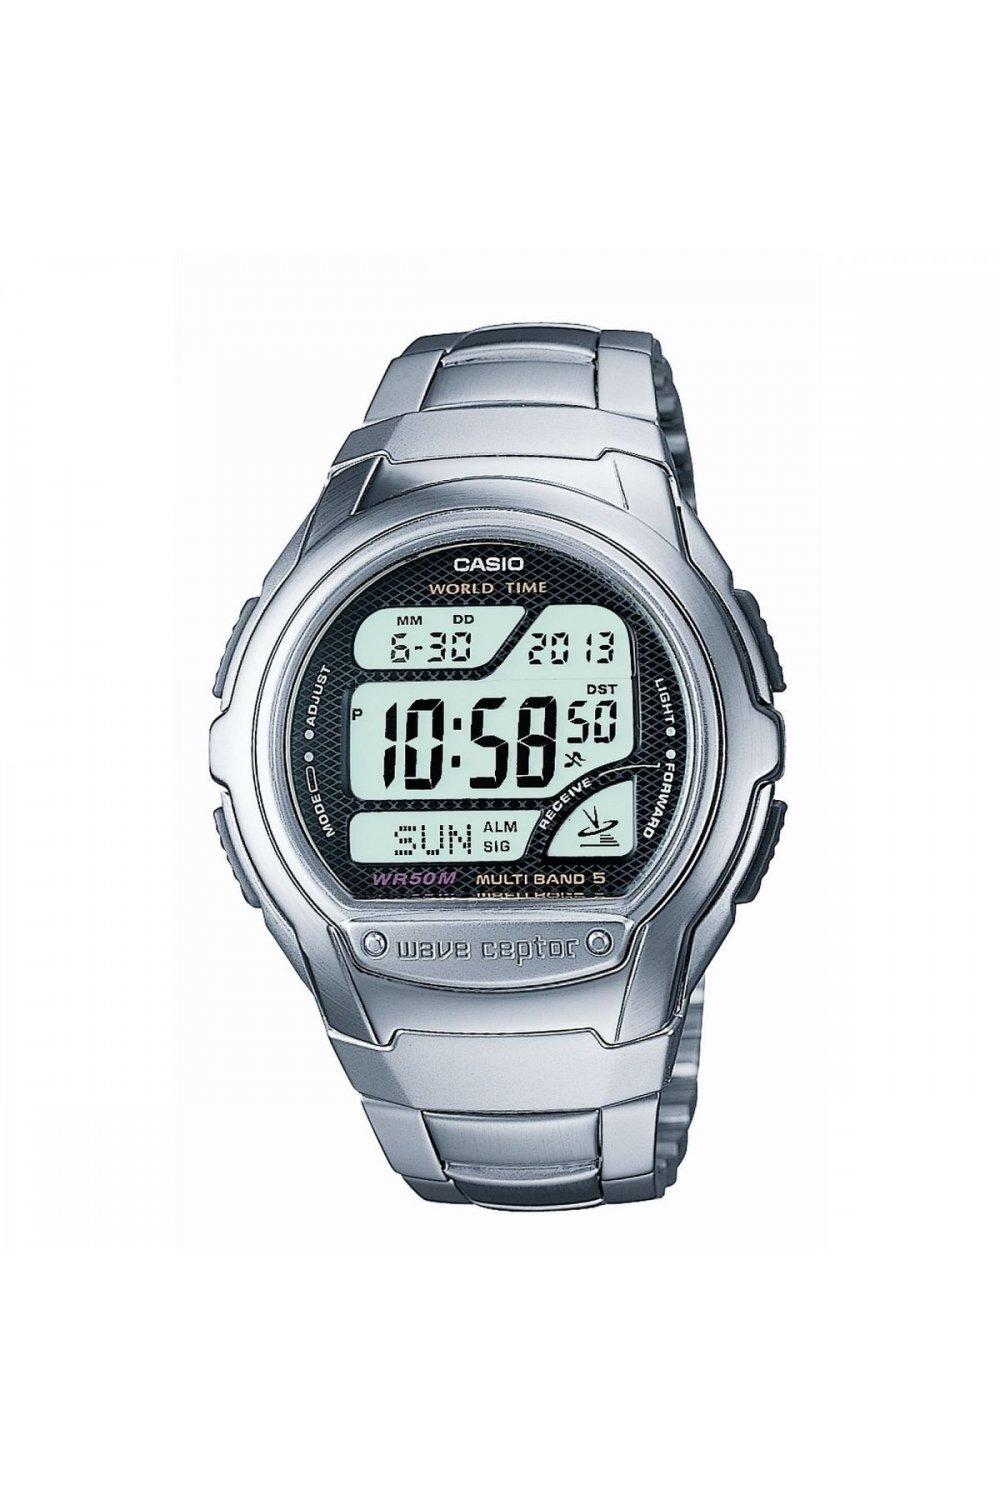 Wave Ceptor Stainless Steel Classic Digital Watch - Wv-58Rd-1Aef